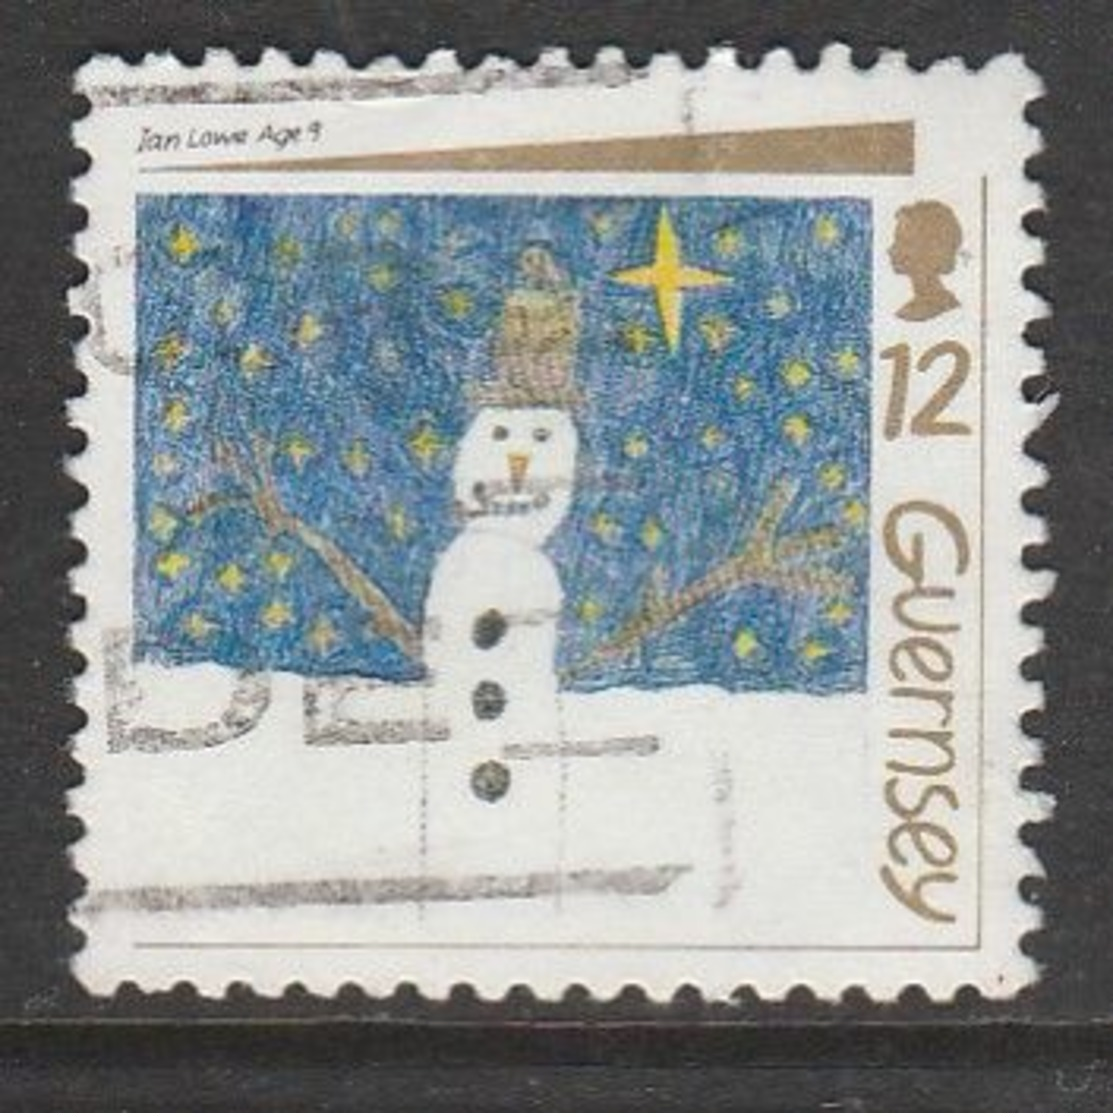 Guernsey 1991 Christmas Stamps 21p Multicolored SW 544 O Used - Guernsey